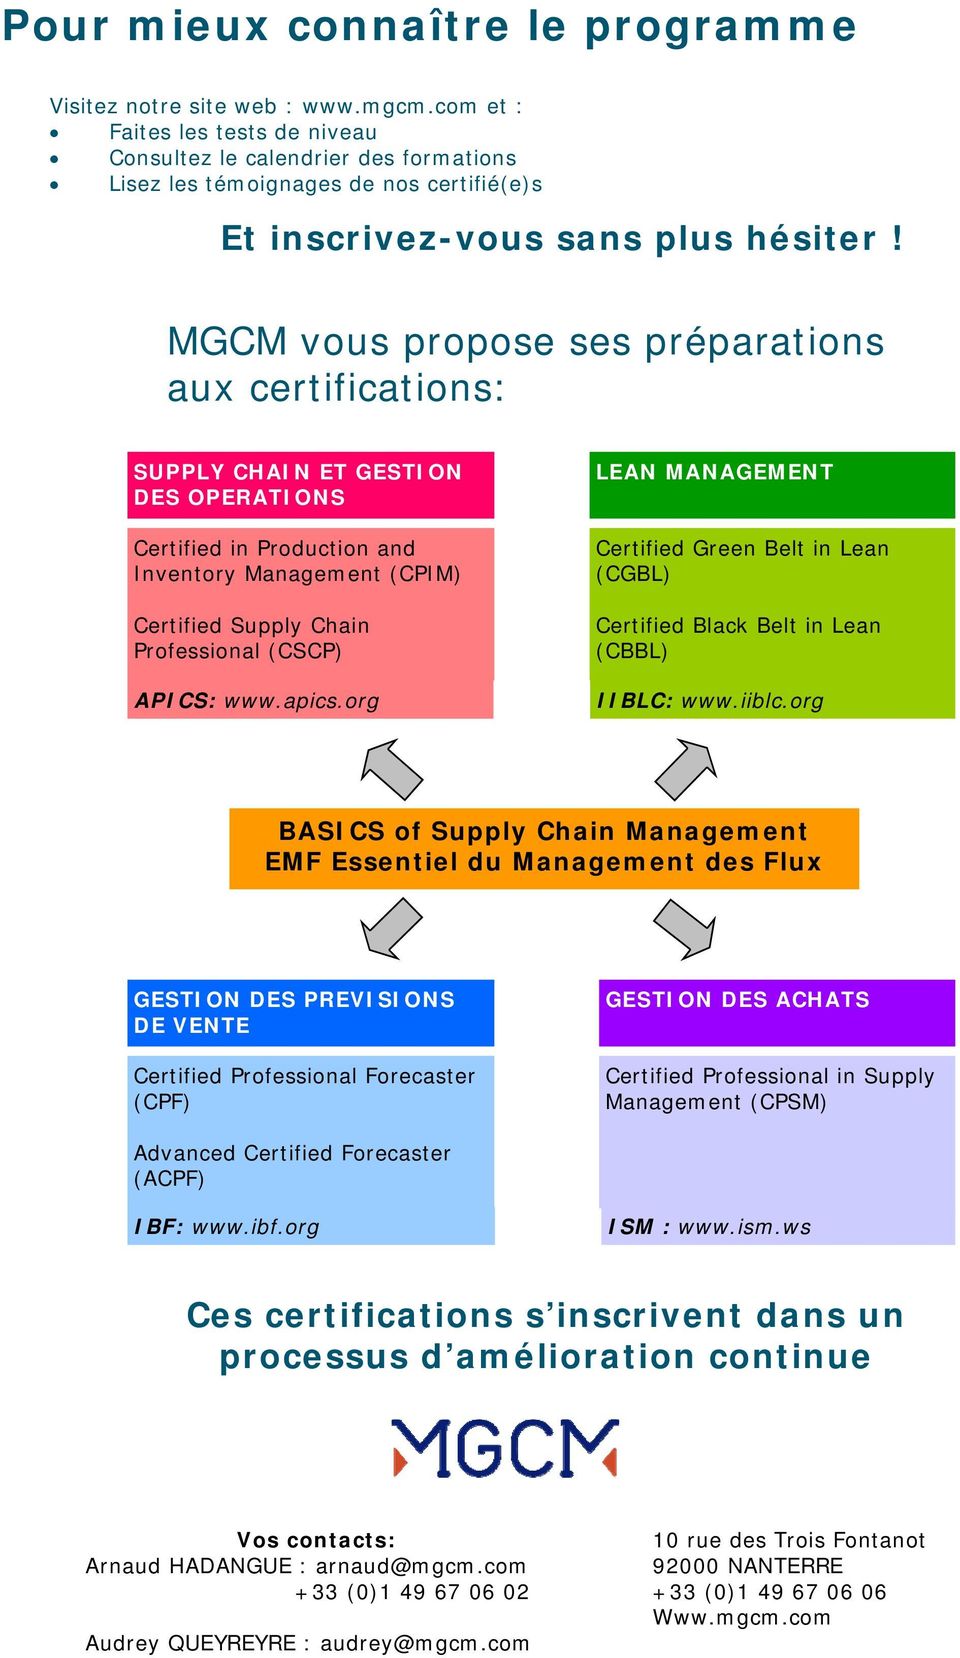 MGCM vous propose ses préparations aux certifications: SUPPLY CHAIN ET GESTION DES OPERATIONS Certified in Production and Inventory Management (CPIM) Certified Supply Chain Professional (CSCP) APICS: